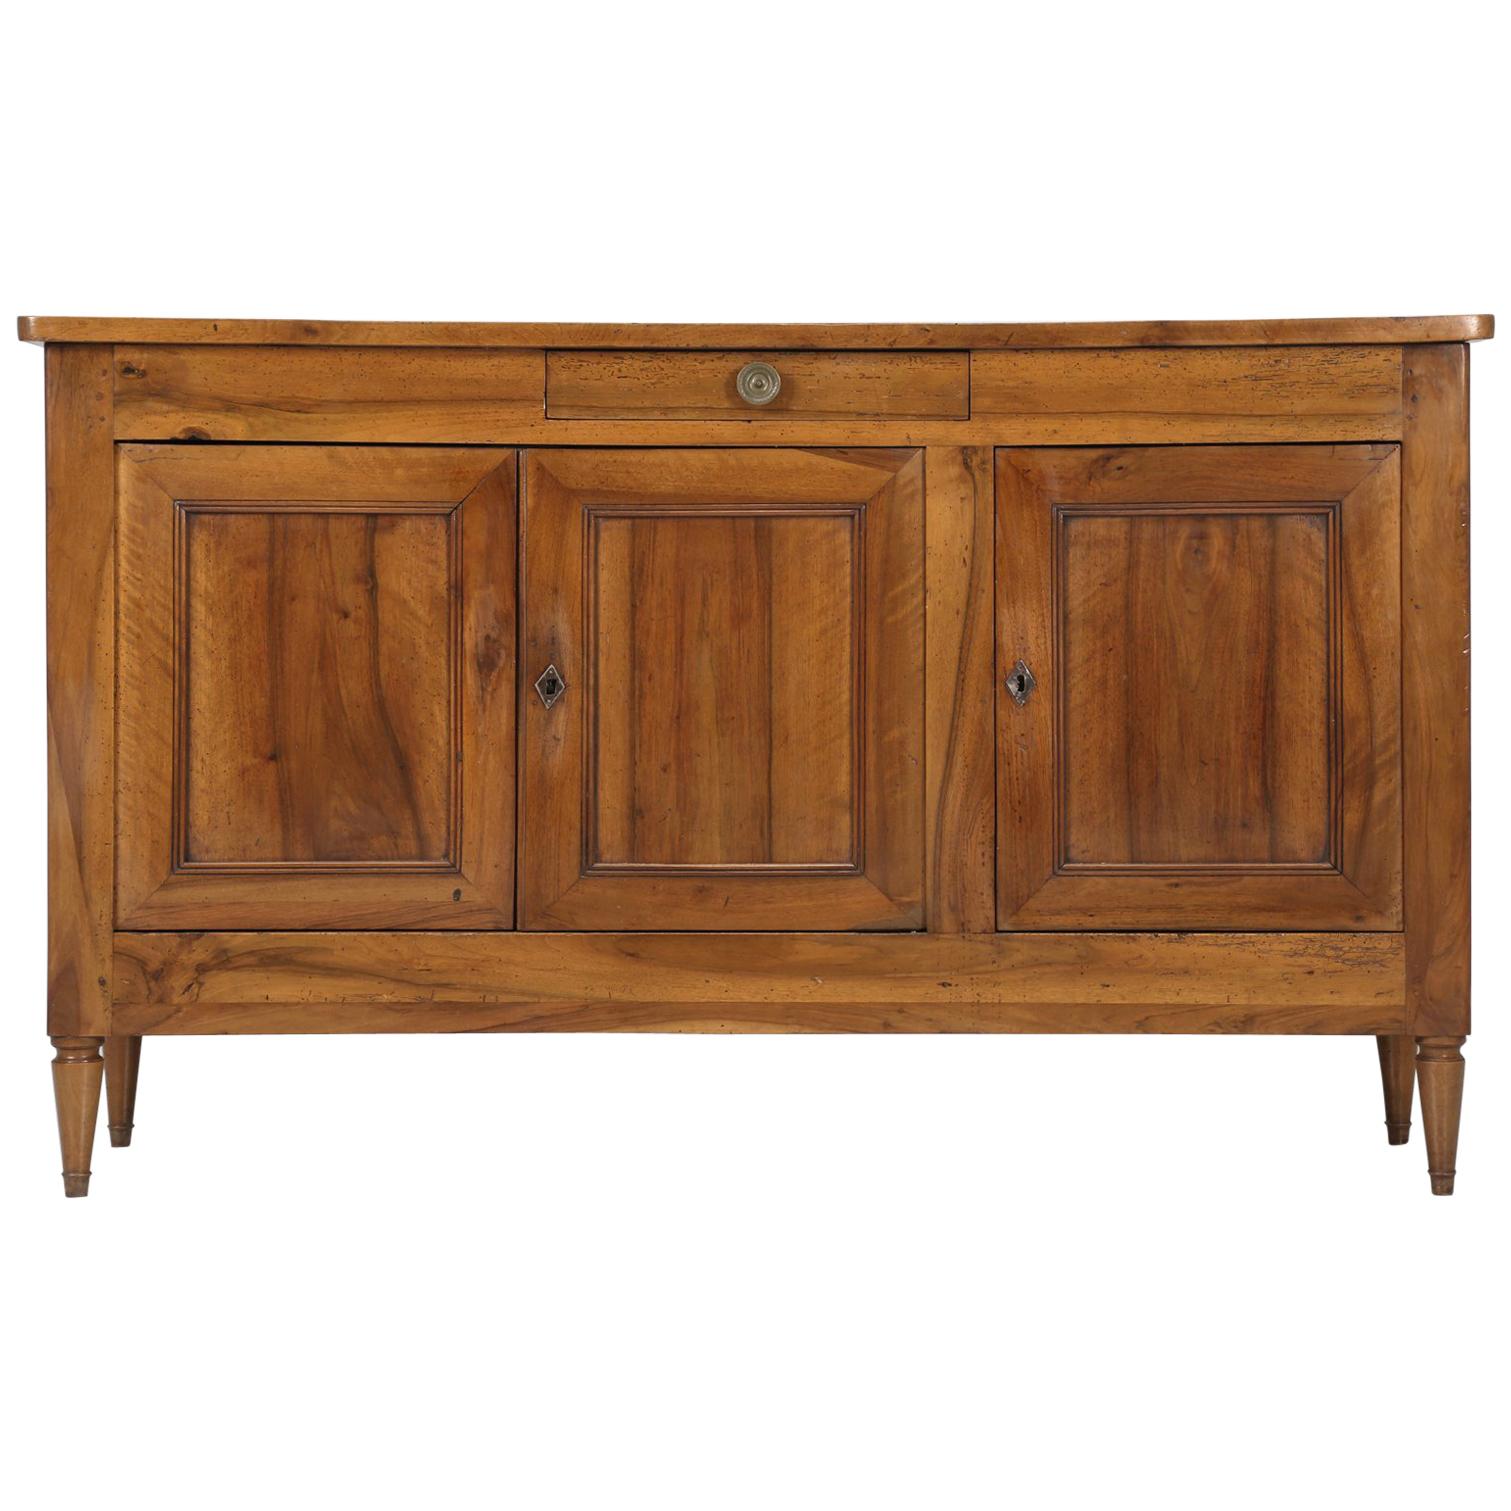 French Antique Directoire Style Buffet in Solid French Walnut